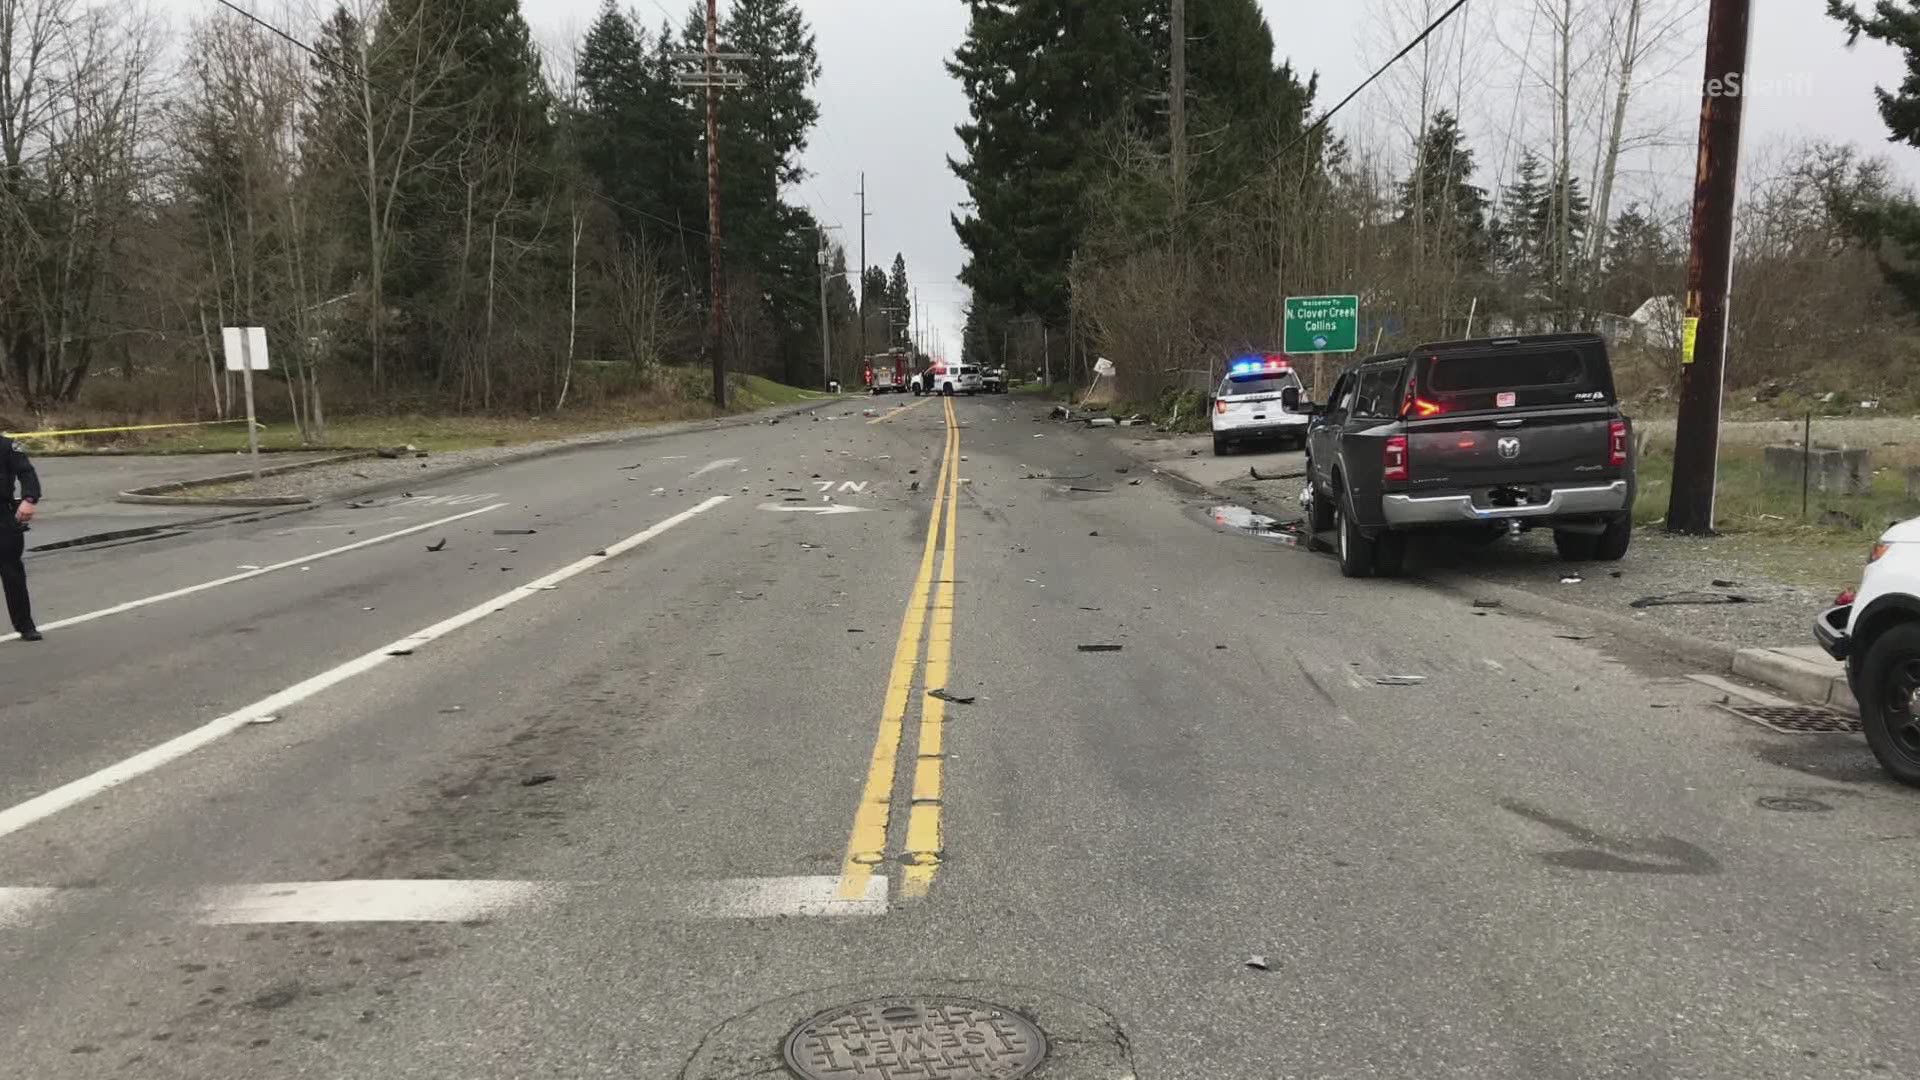 The Pierce County Sheriff's Department says the suspect was traveling at an "extremely" high rate of speed when he allegedly hit the woman's car from behind.